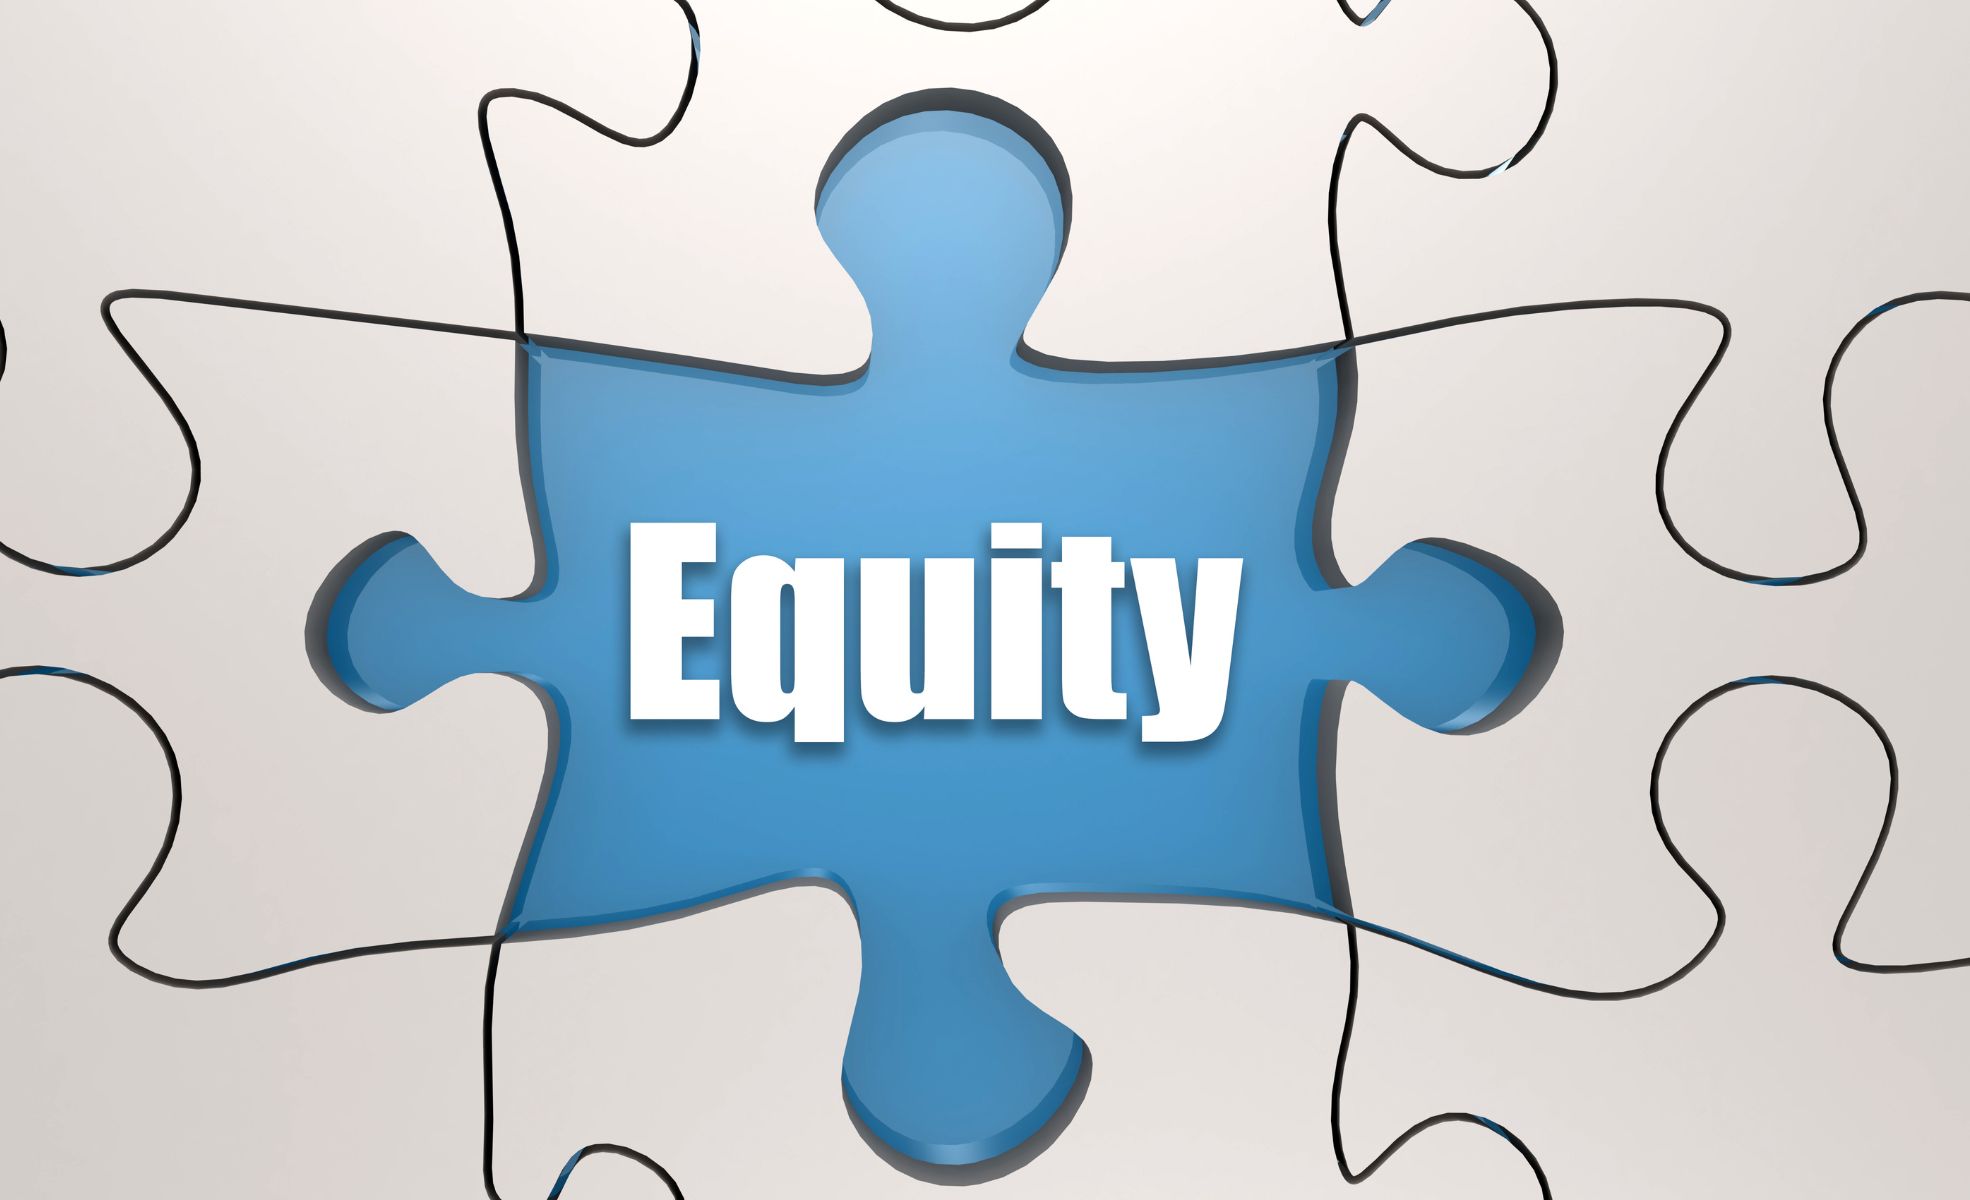 Blue Puzzle Piece Saying "Equity"